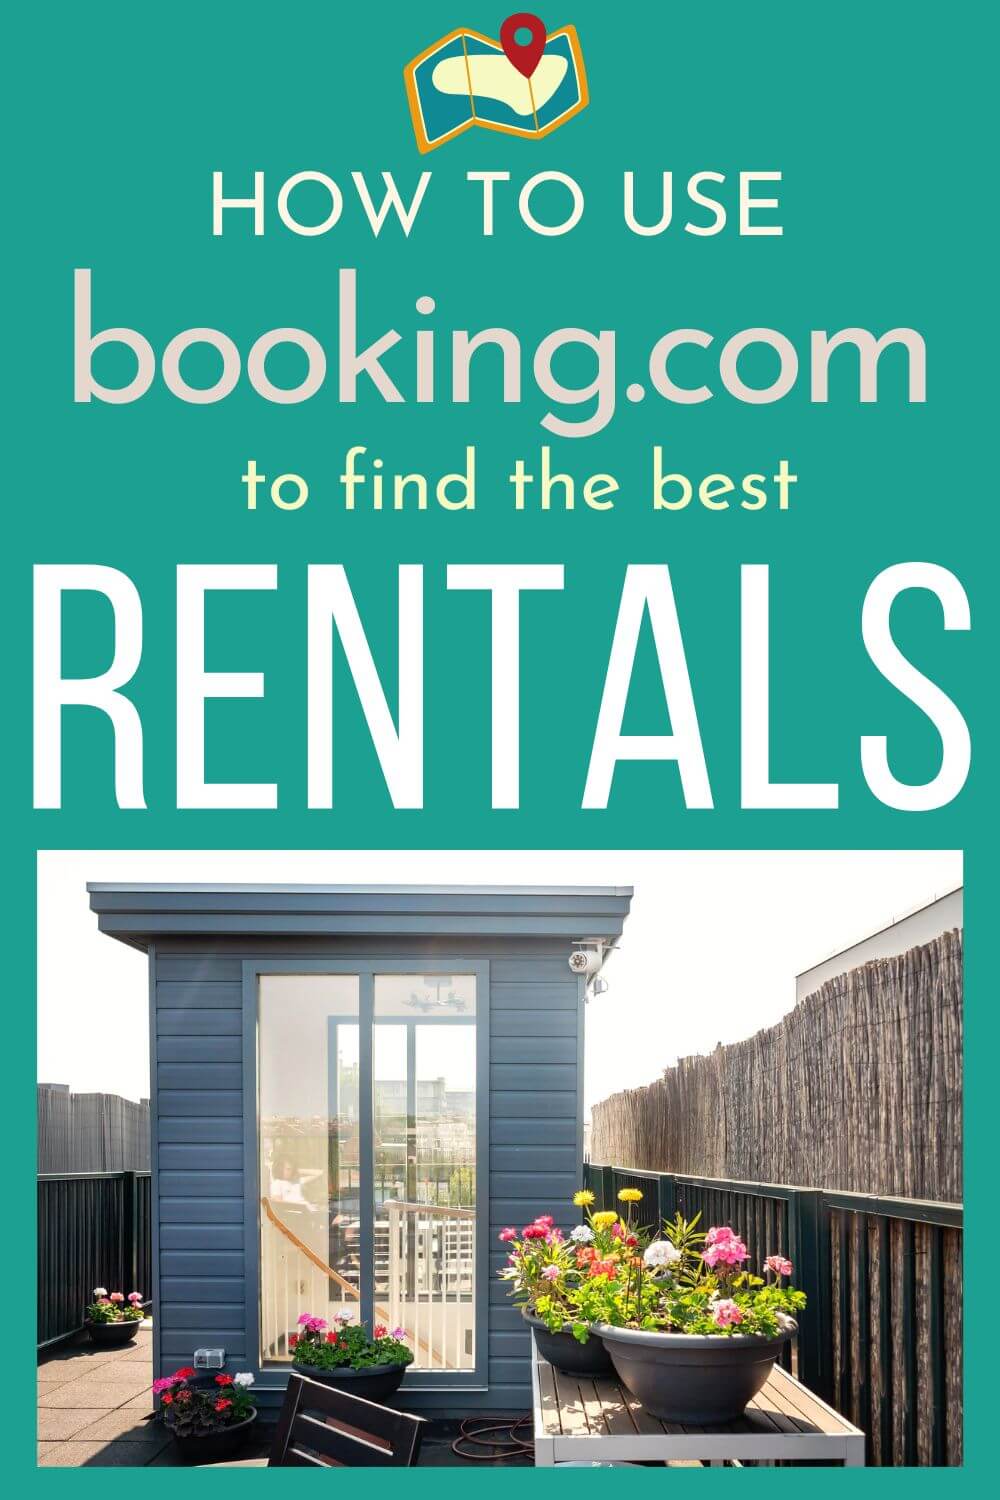 How To Use booking.com to find the best rentals